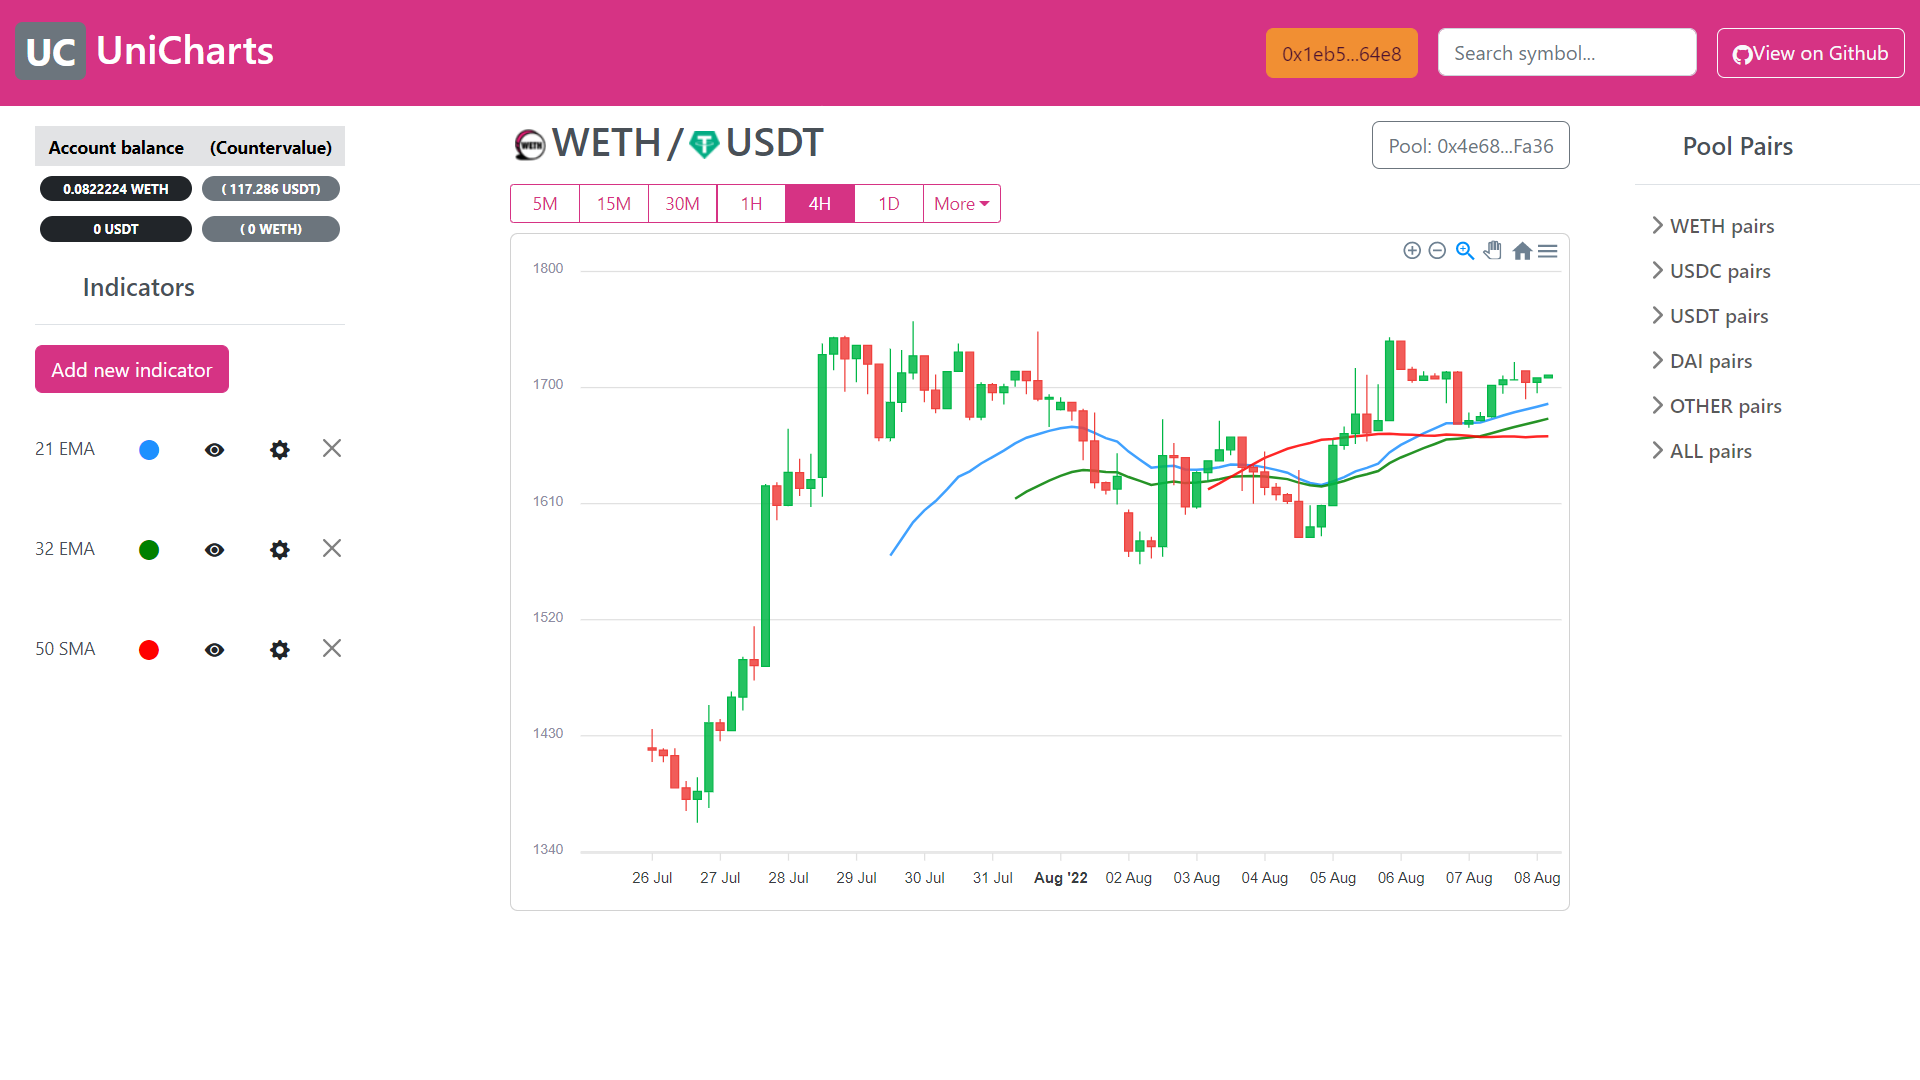 Charting app UniCharts. Showing chart of WETH/USDT cryptocurrency pair on blockchain Uniswap V3 Decentralized Exchange liquidity pool